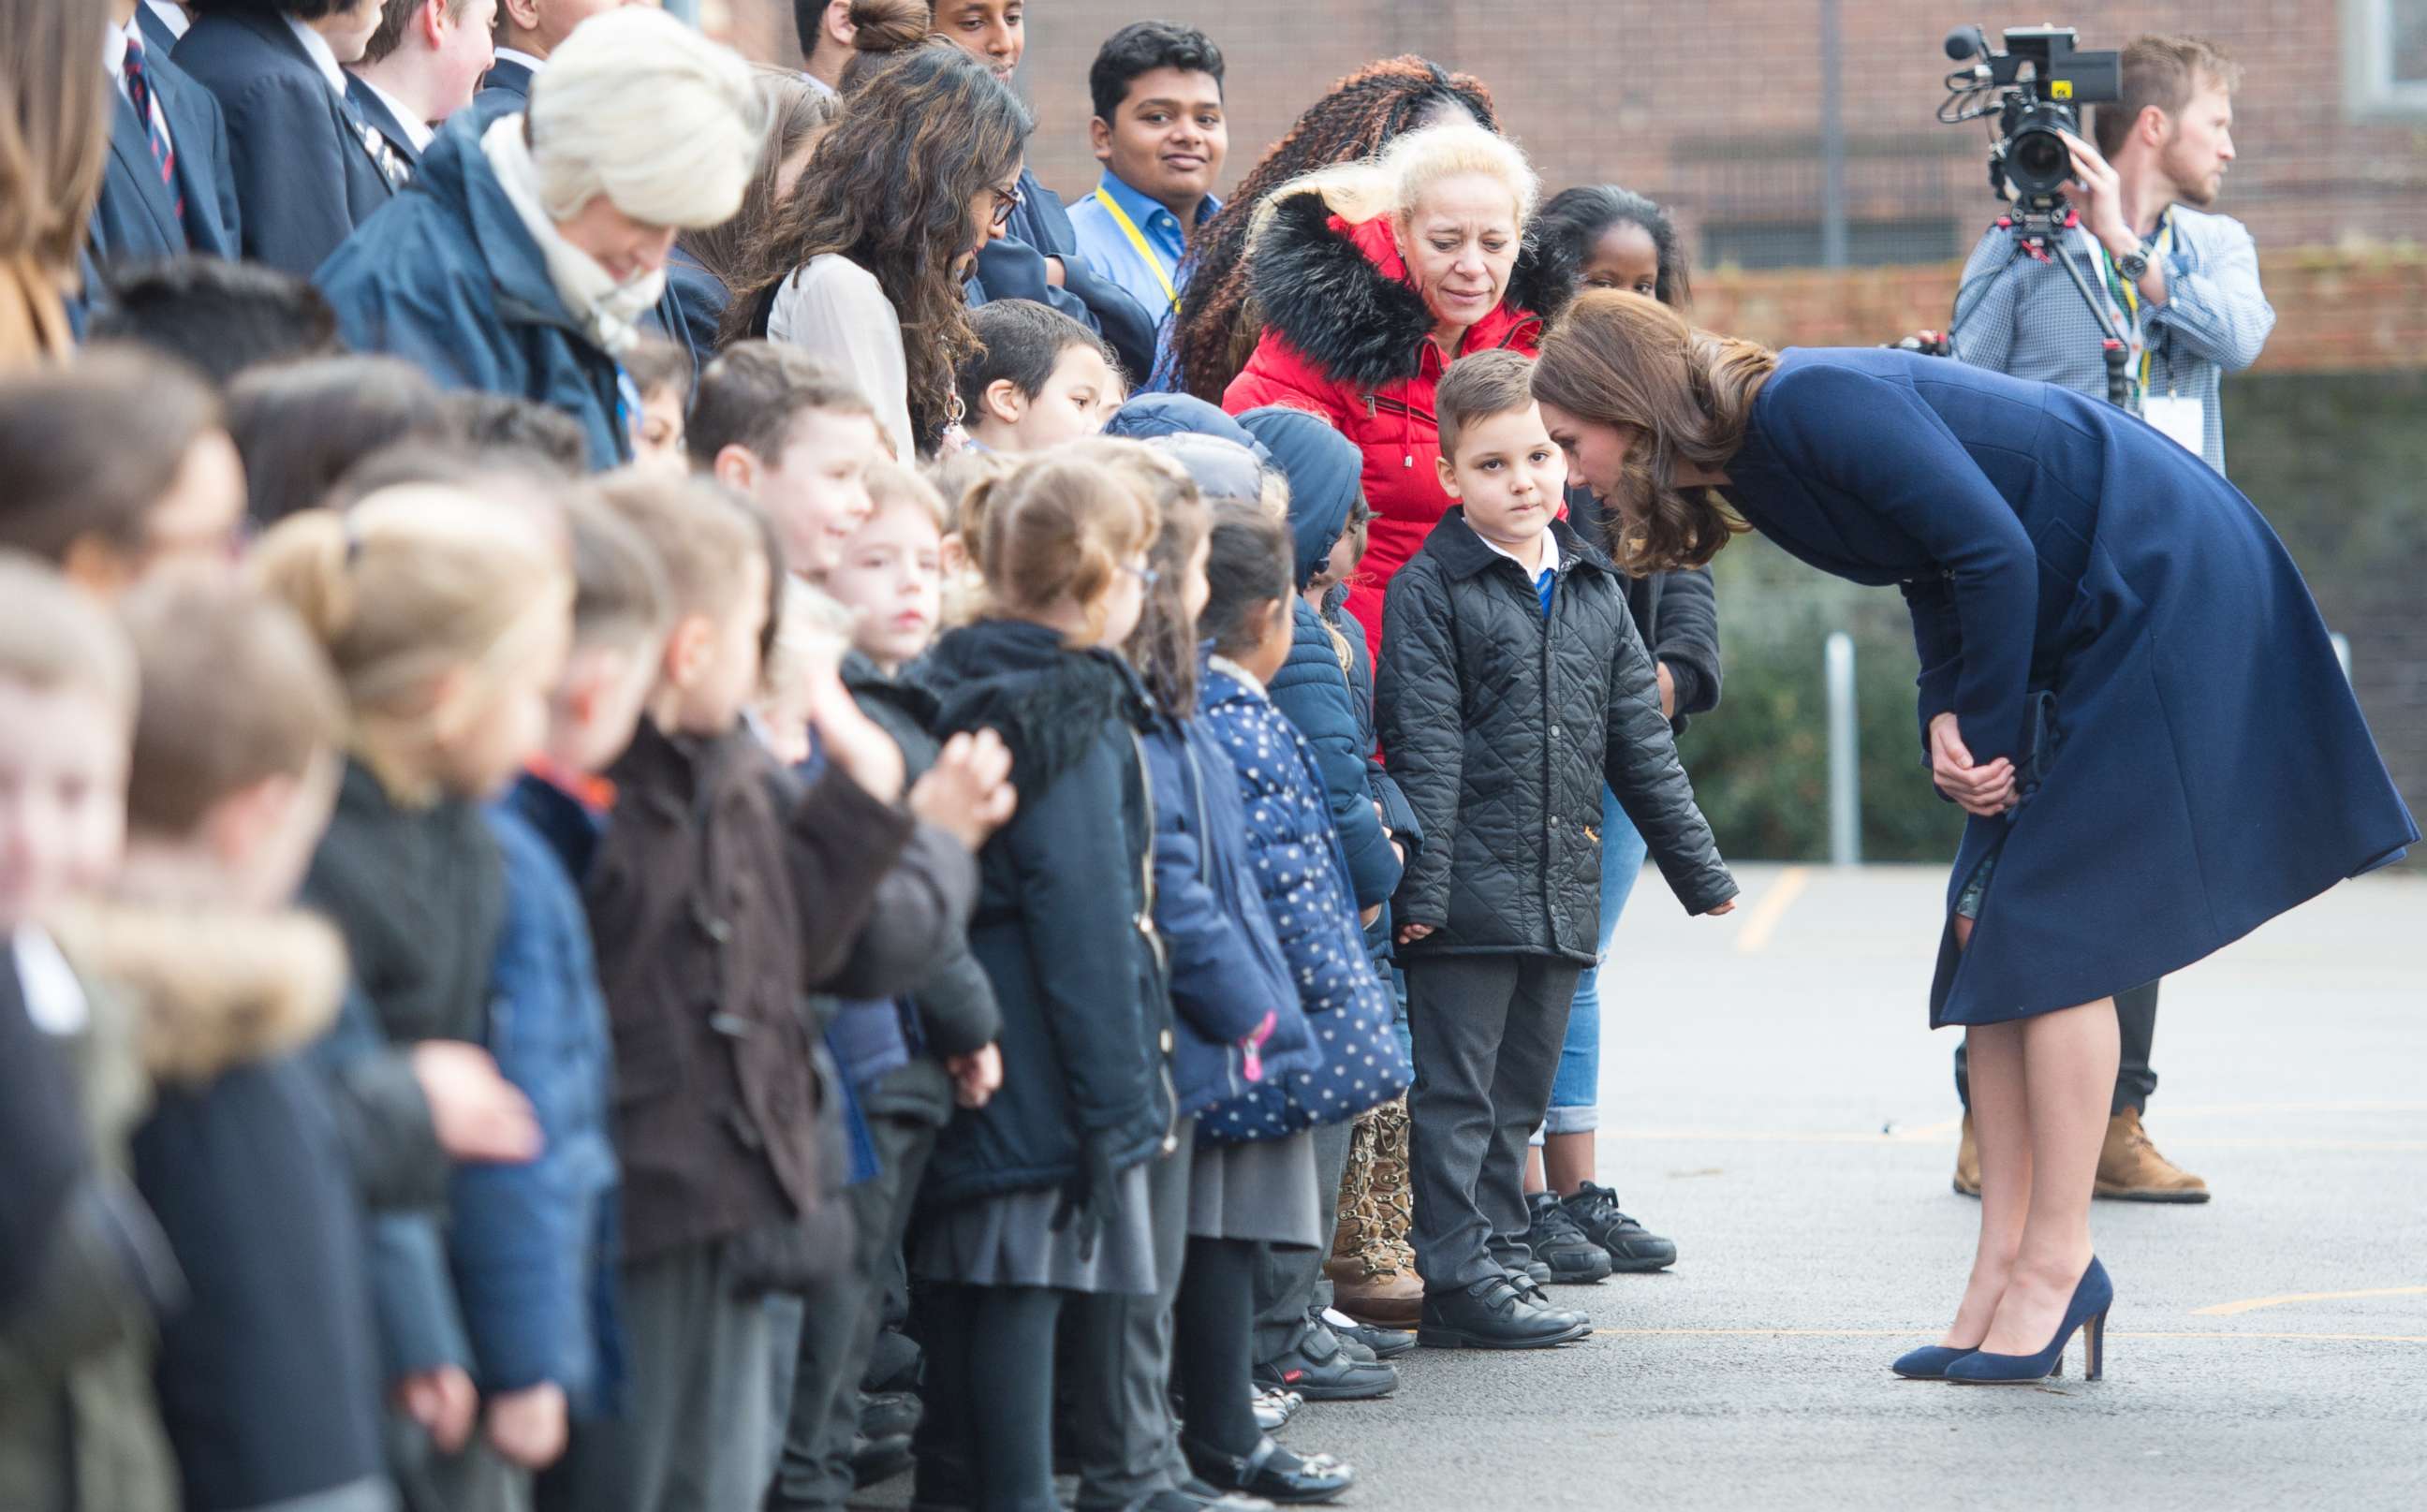 PHOTO: Kate Middleton, Duchess of Cambridge, visits the Reach Academy school who is working in partnership with Place2Be and other organisations to support children, families and the whole school community, Jan. 10, 2018, in Feltham, London.